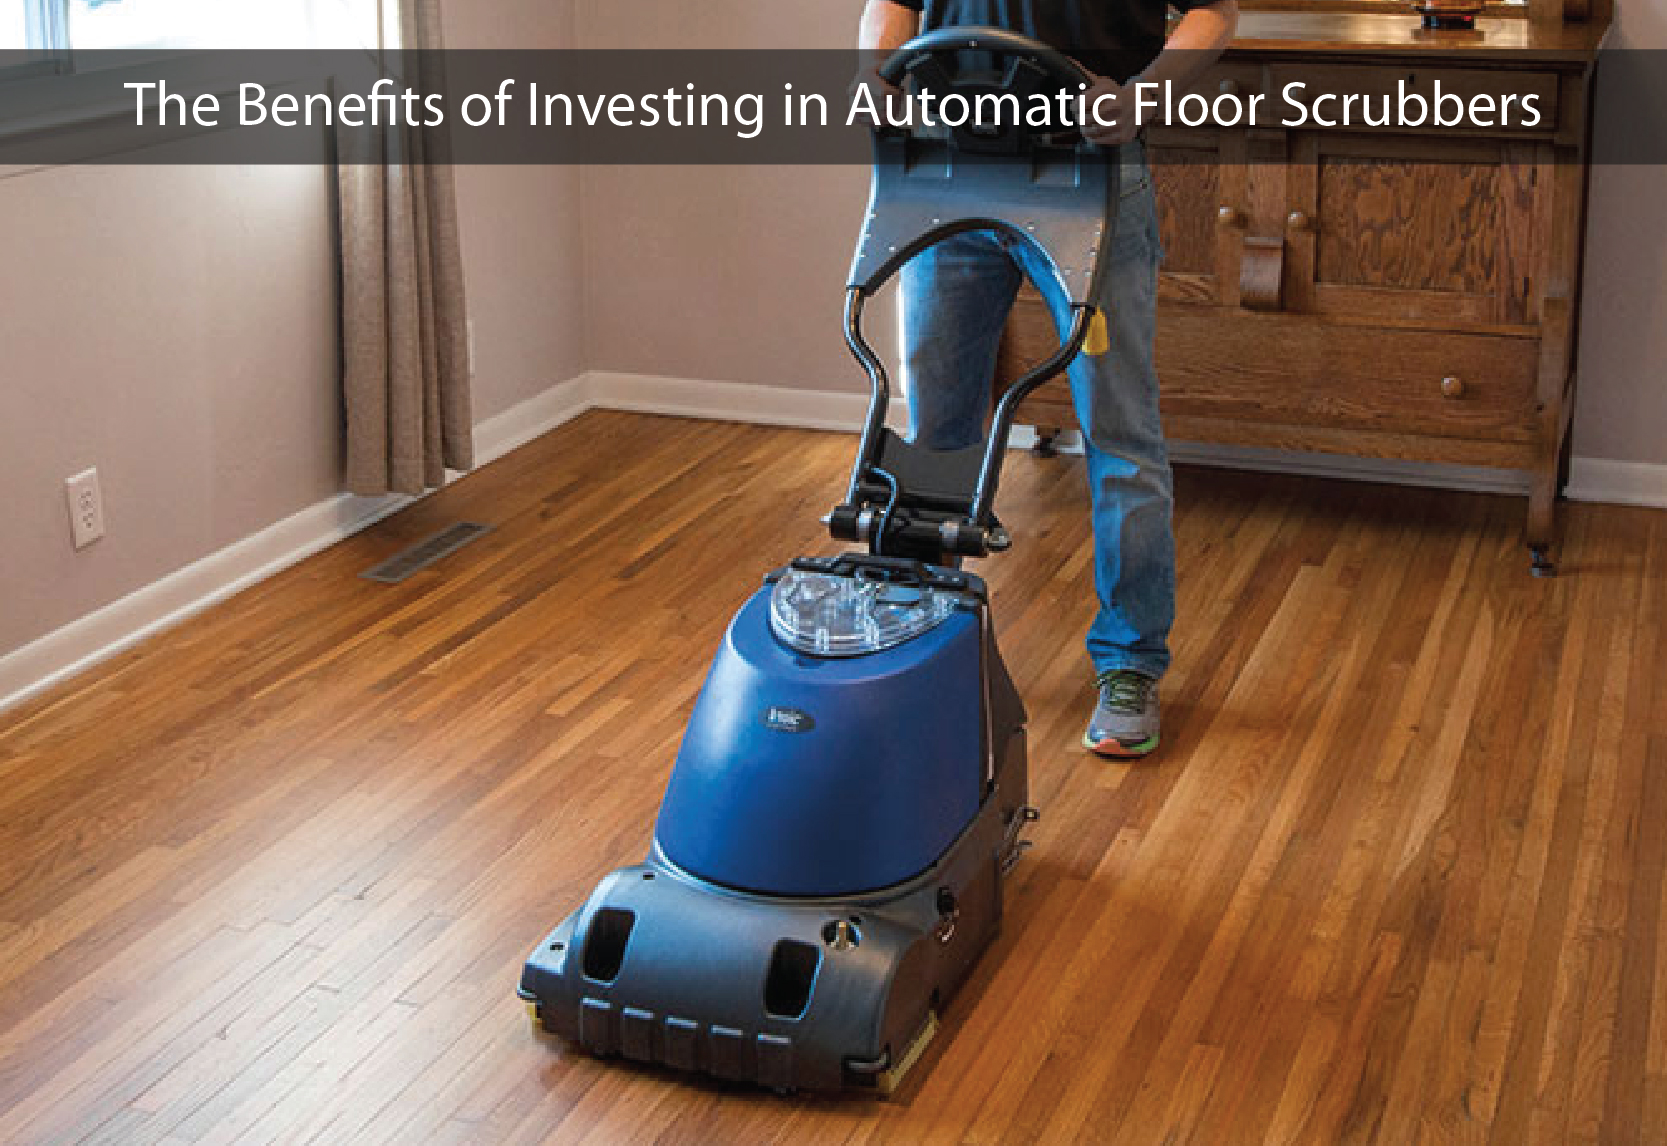 The Benefits of Investing in Automatic Floor Scrubbers